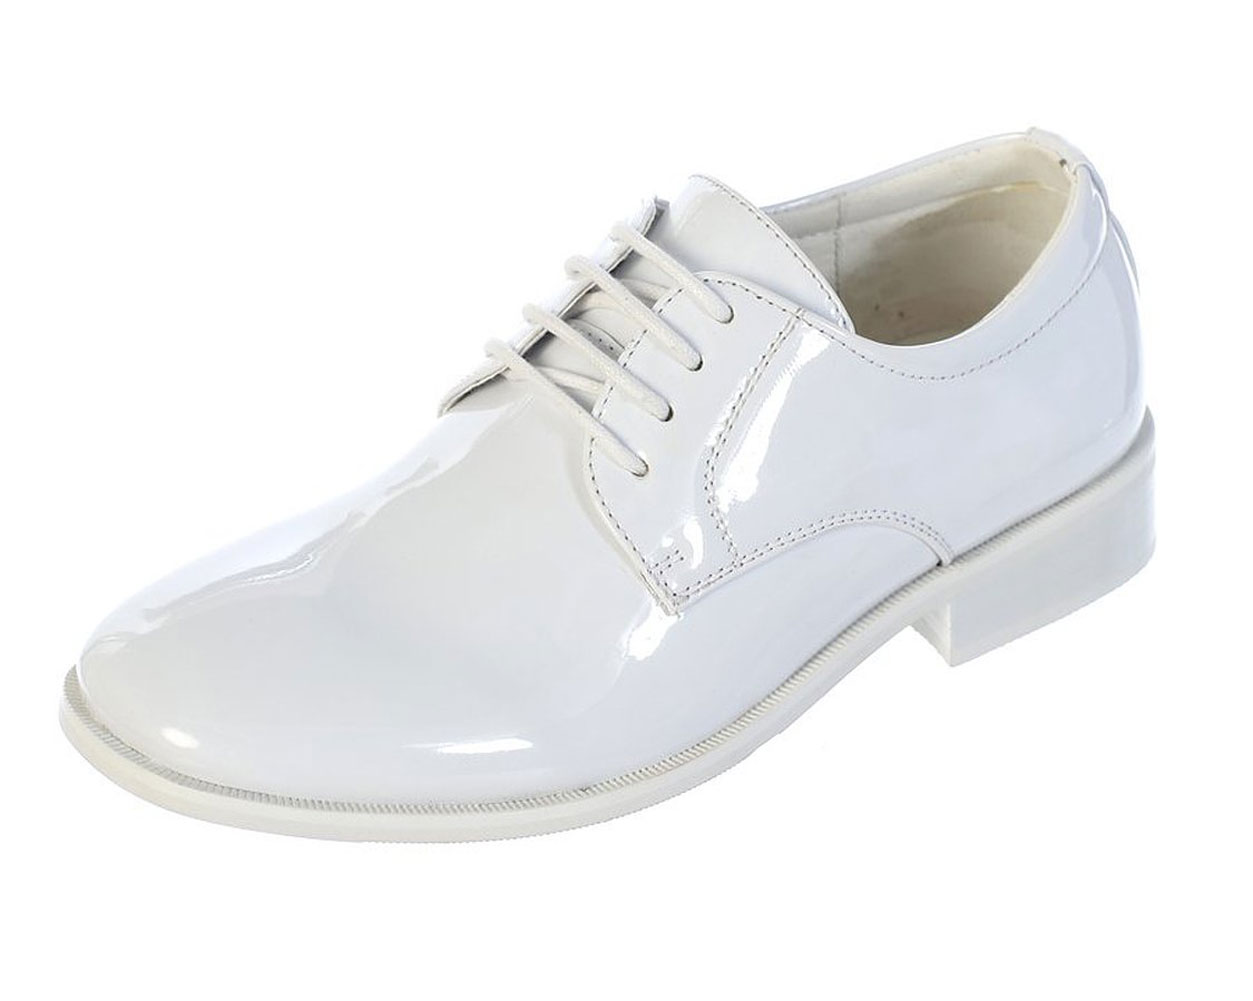 Avery Hill Boys Shiny or Shiny Patent Leather Shoes Wh Shiny Toddler 6